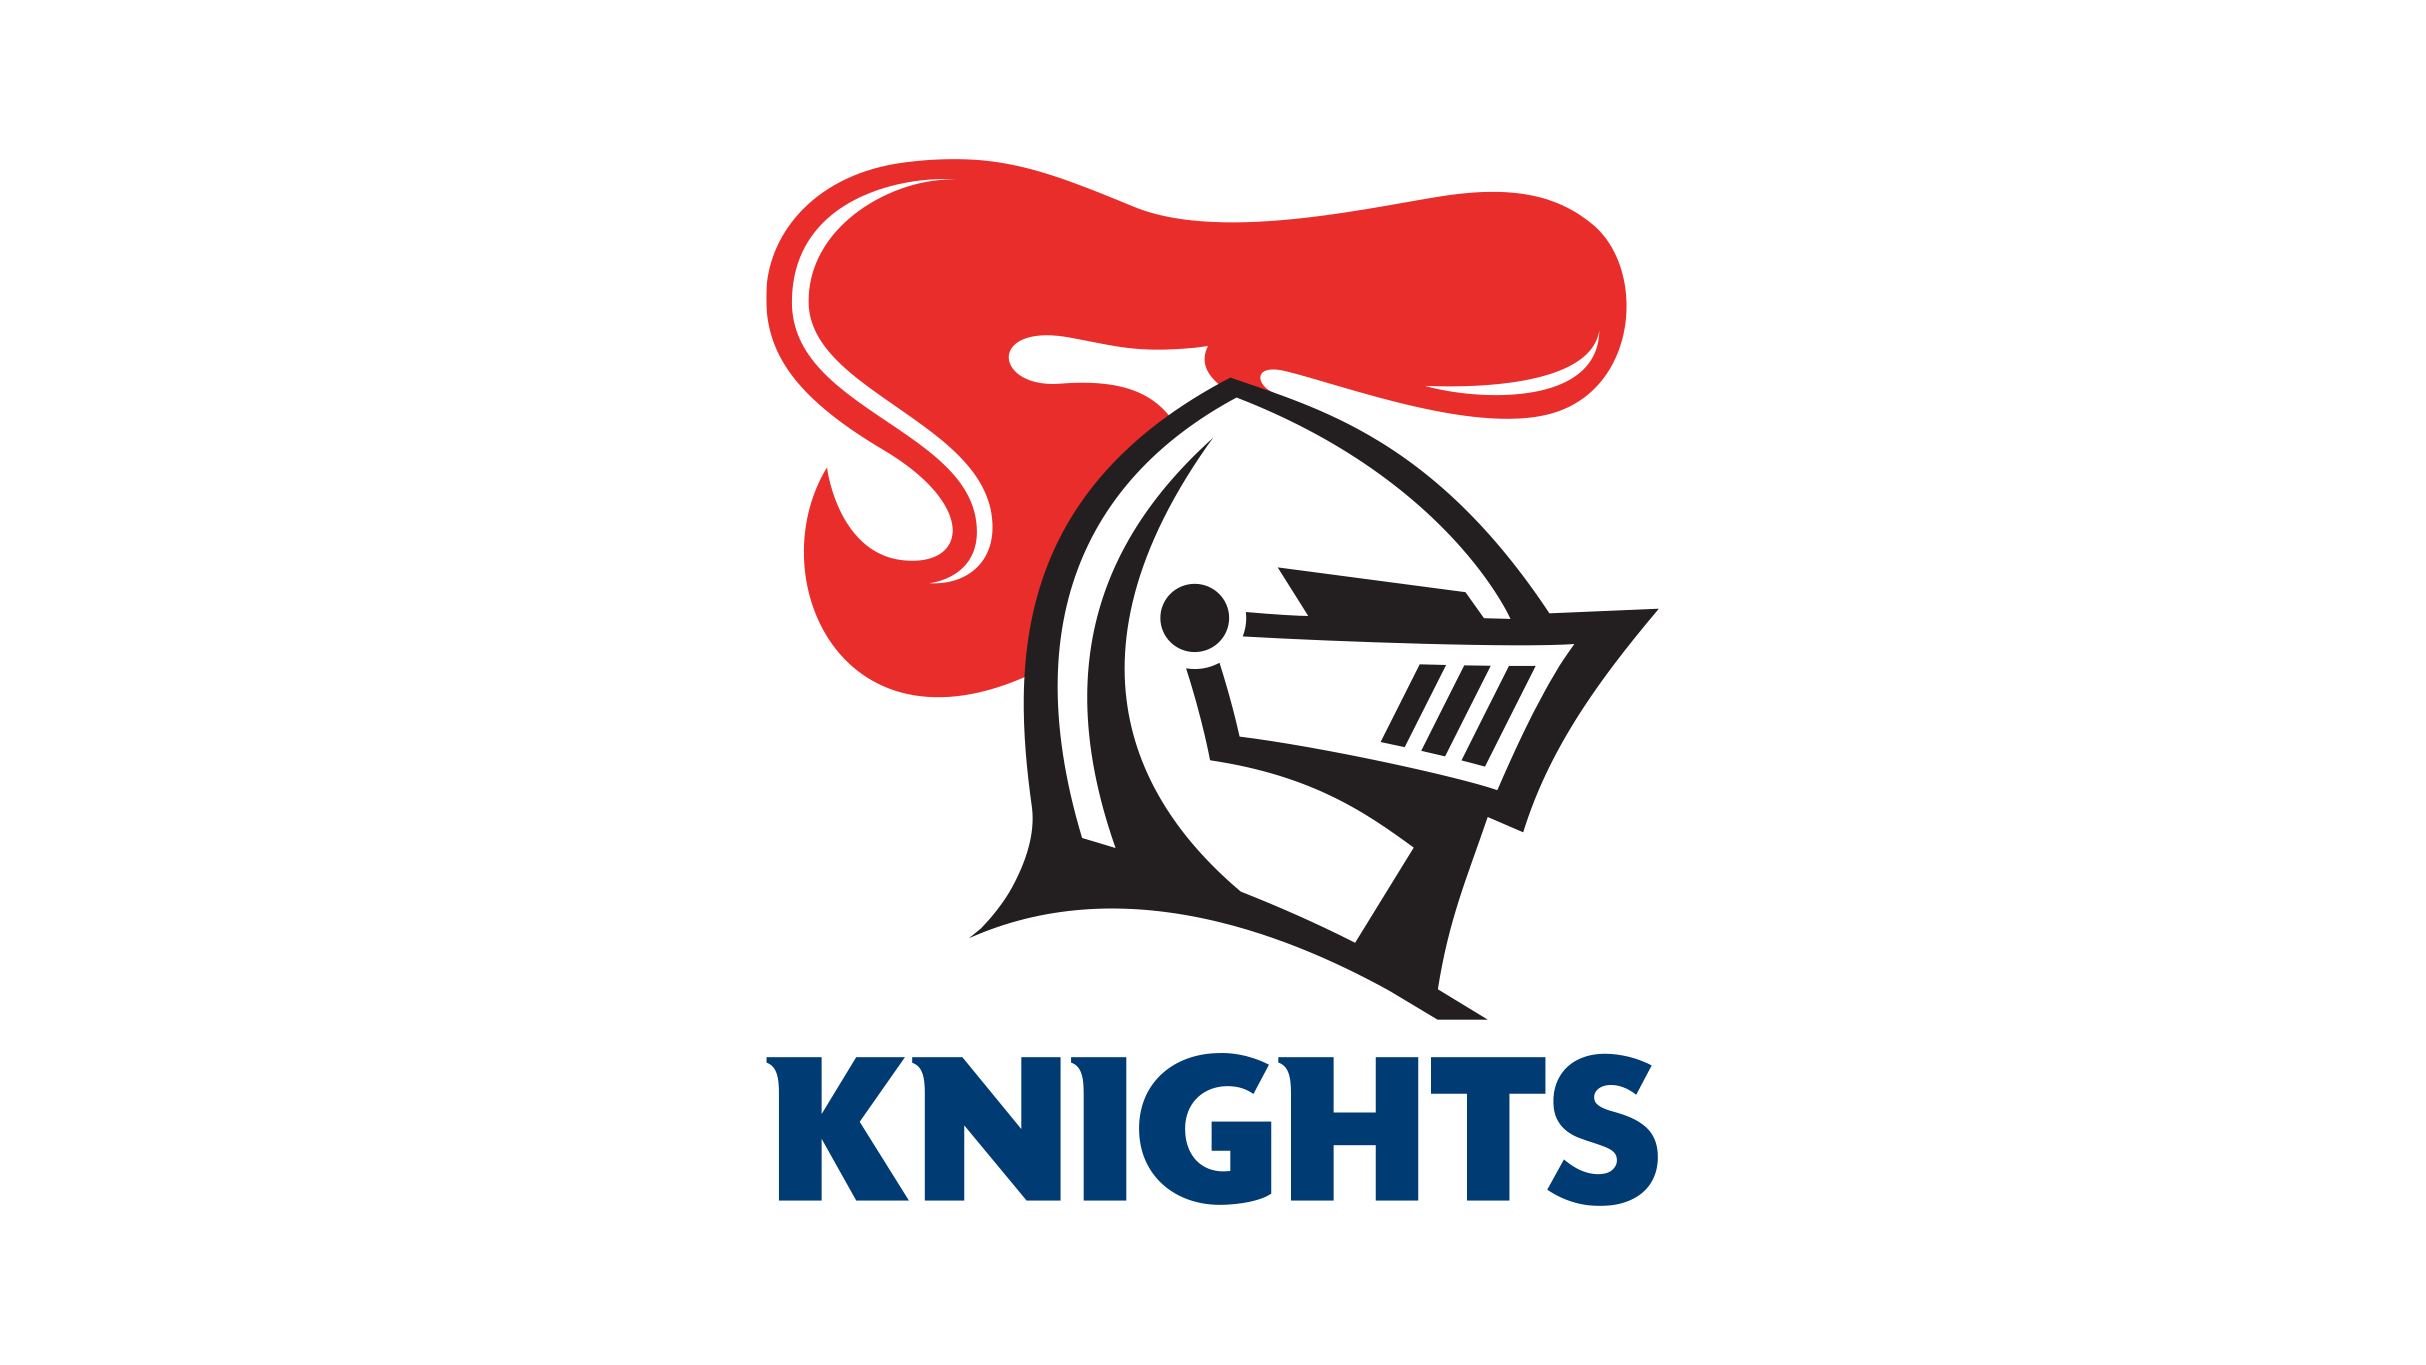 Newcastle Knights v Parramatta Eels in Newcastle promo photo for Knights Members presale offer code